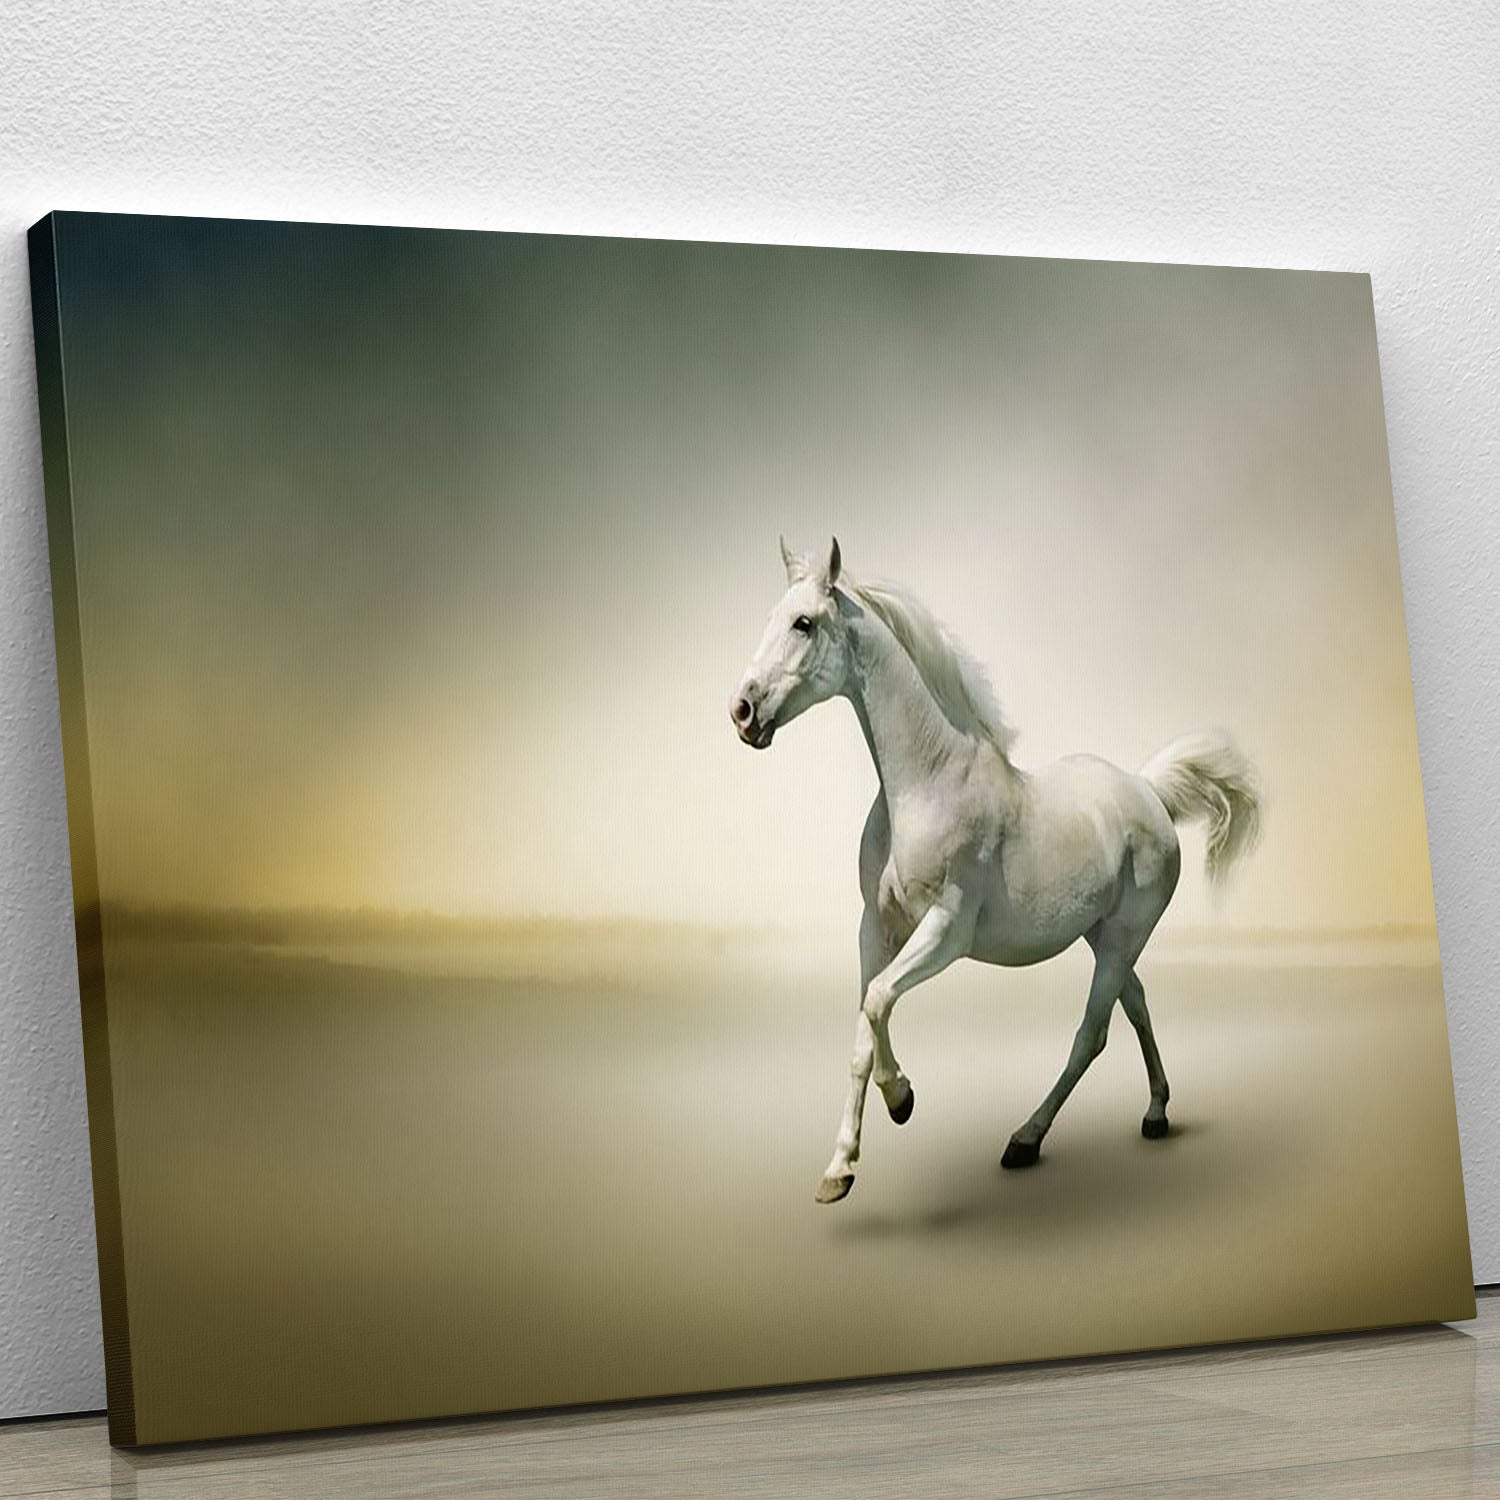 White horse in motion Canvas Print or Poster - Canvas Art Rocks - 1